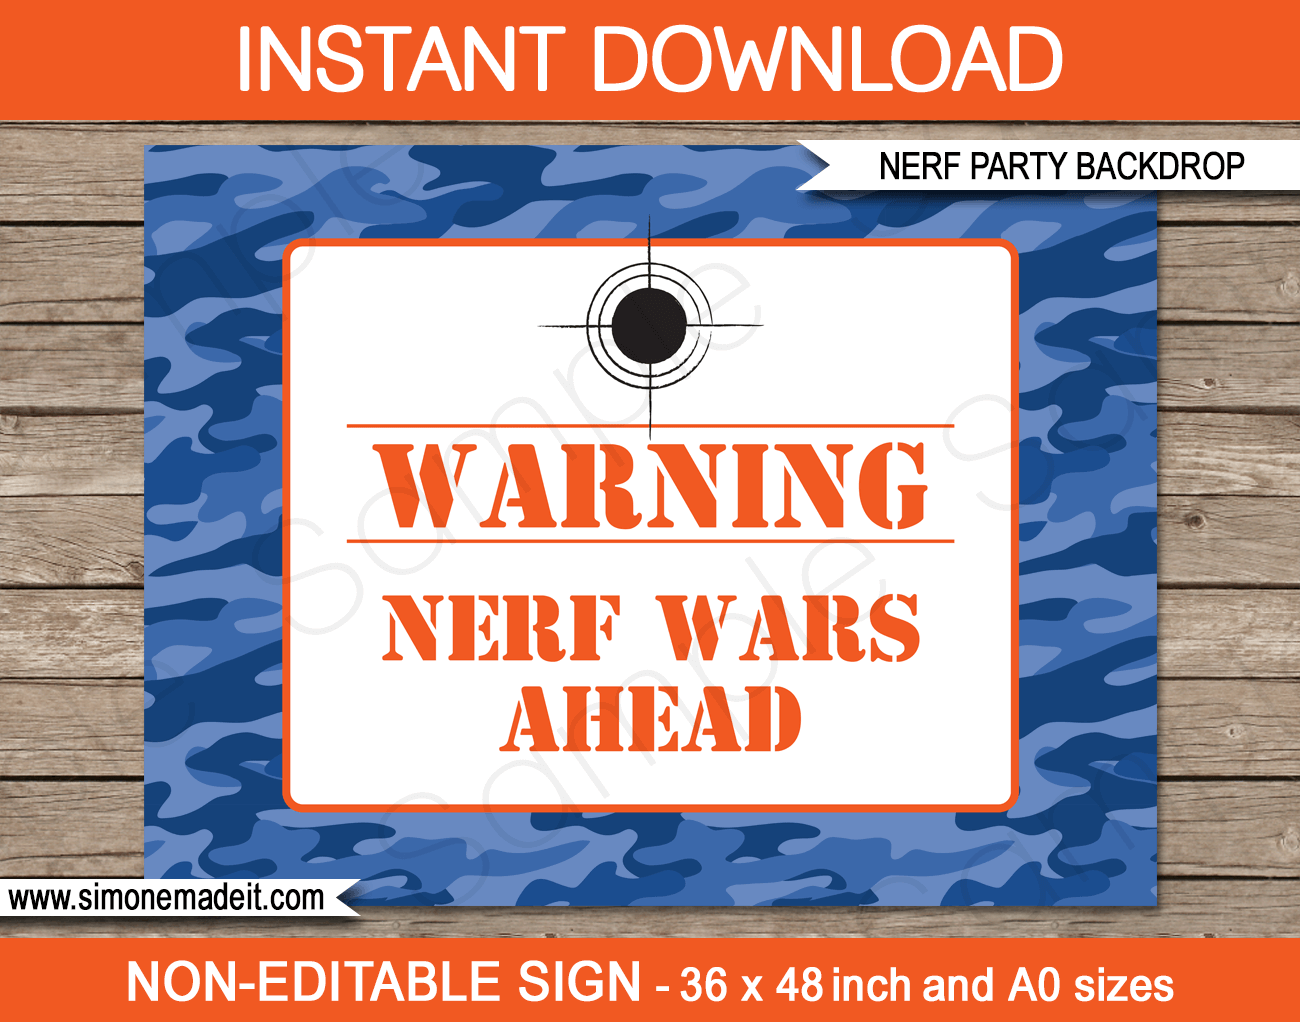 Nerf Birthday Party Backdrop or Sign | Printable DIY Template | Party Decorations | 36x48 inches | A0 | $4.50 Instant Download via SIMONEmadeit.com